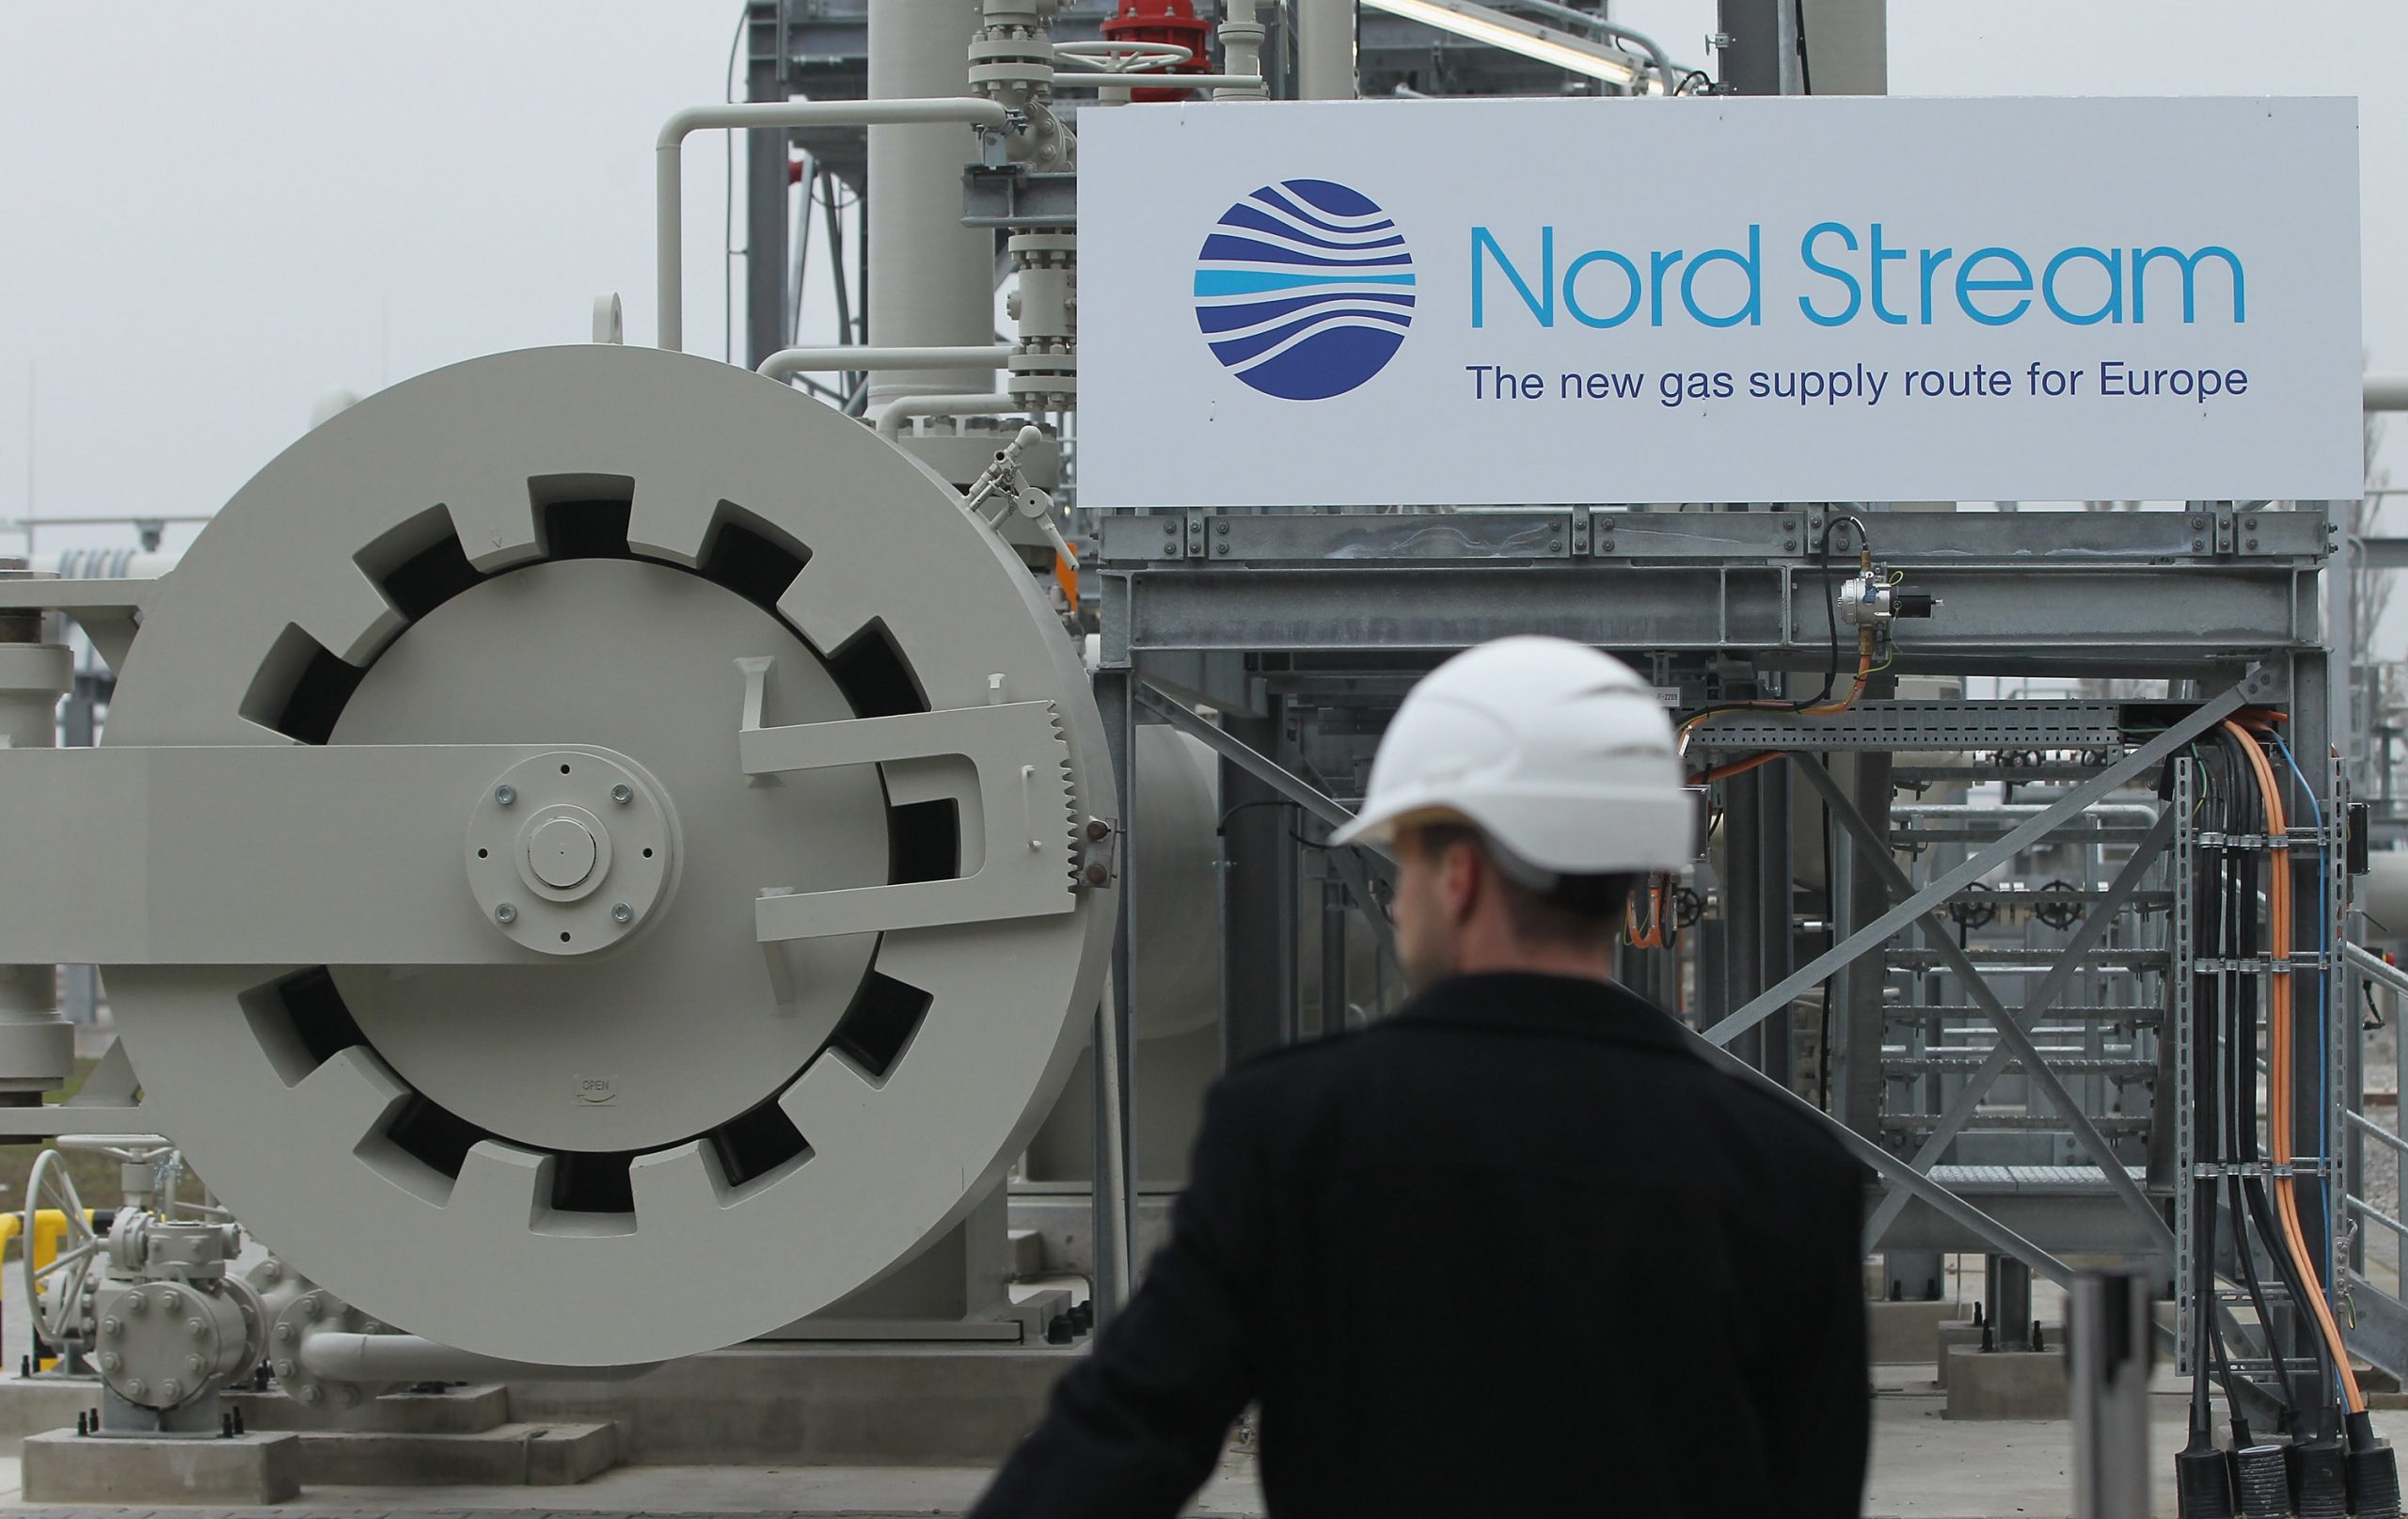 Canadian lawmakers will be called to explain return of Nord Stream turbines